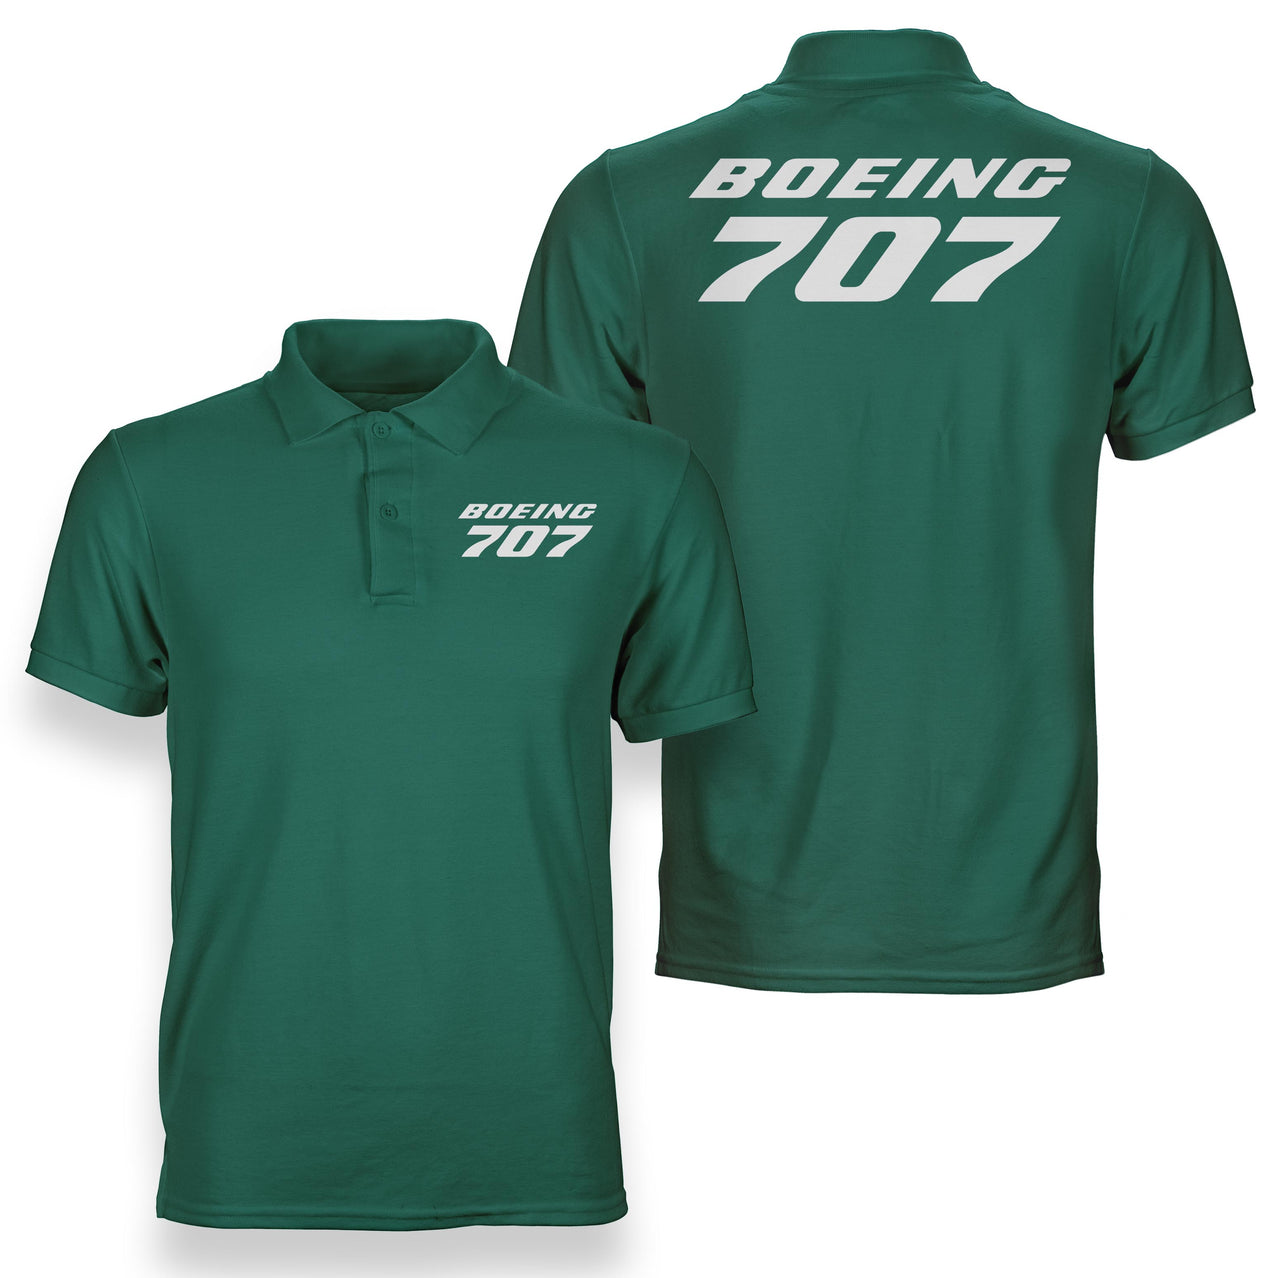 Boeing 707 & Text Designed Double Side Polo T-Shirts